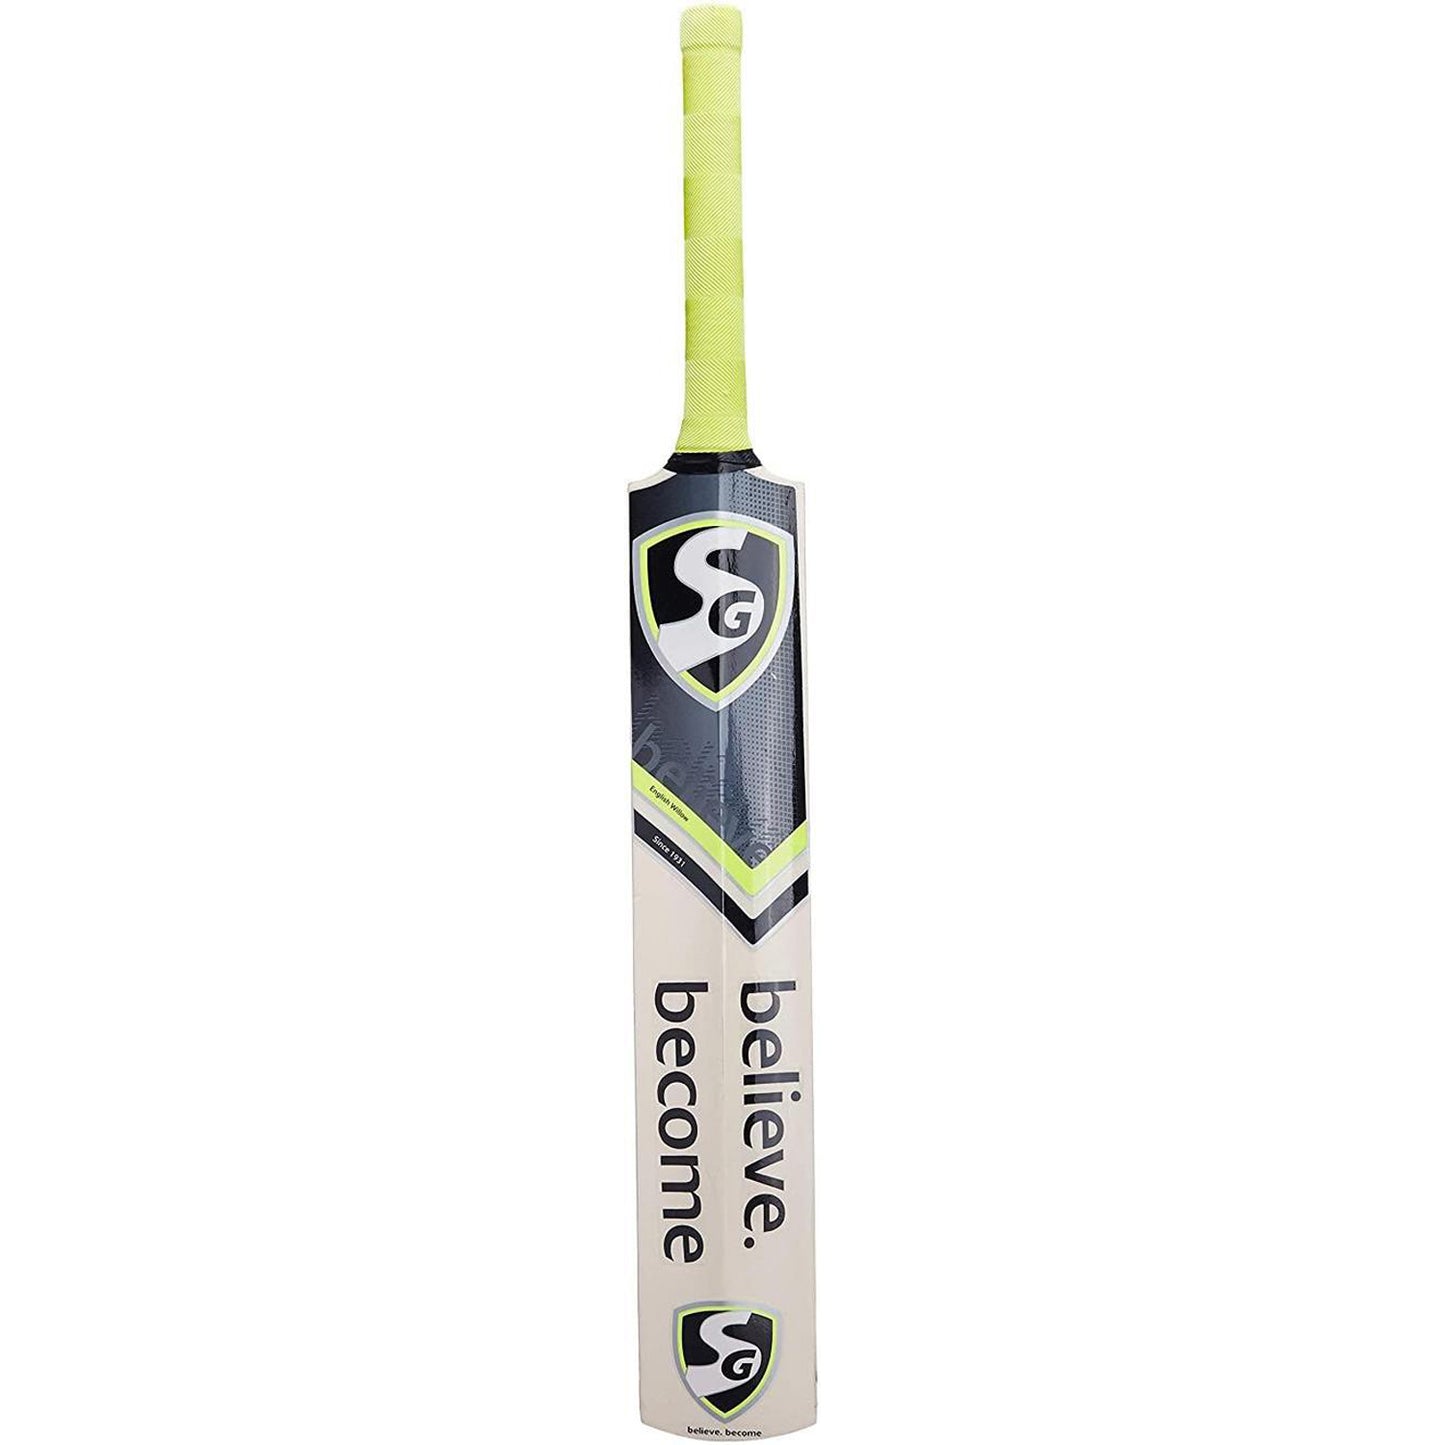 SG RSD Xtreme English Willow Cricket Bat (Color May Vary) - Best Price online Prokicksports.com